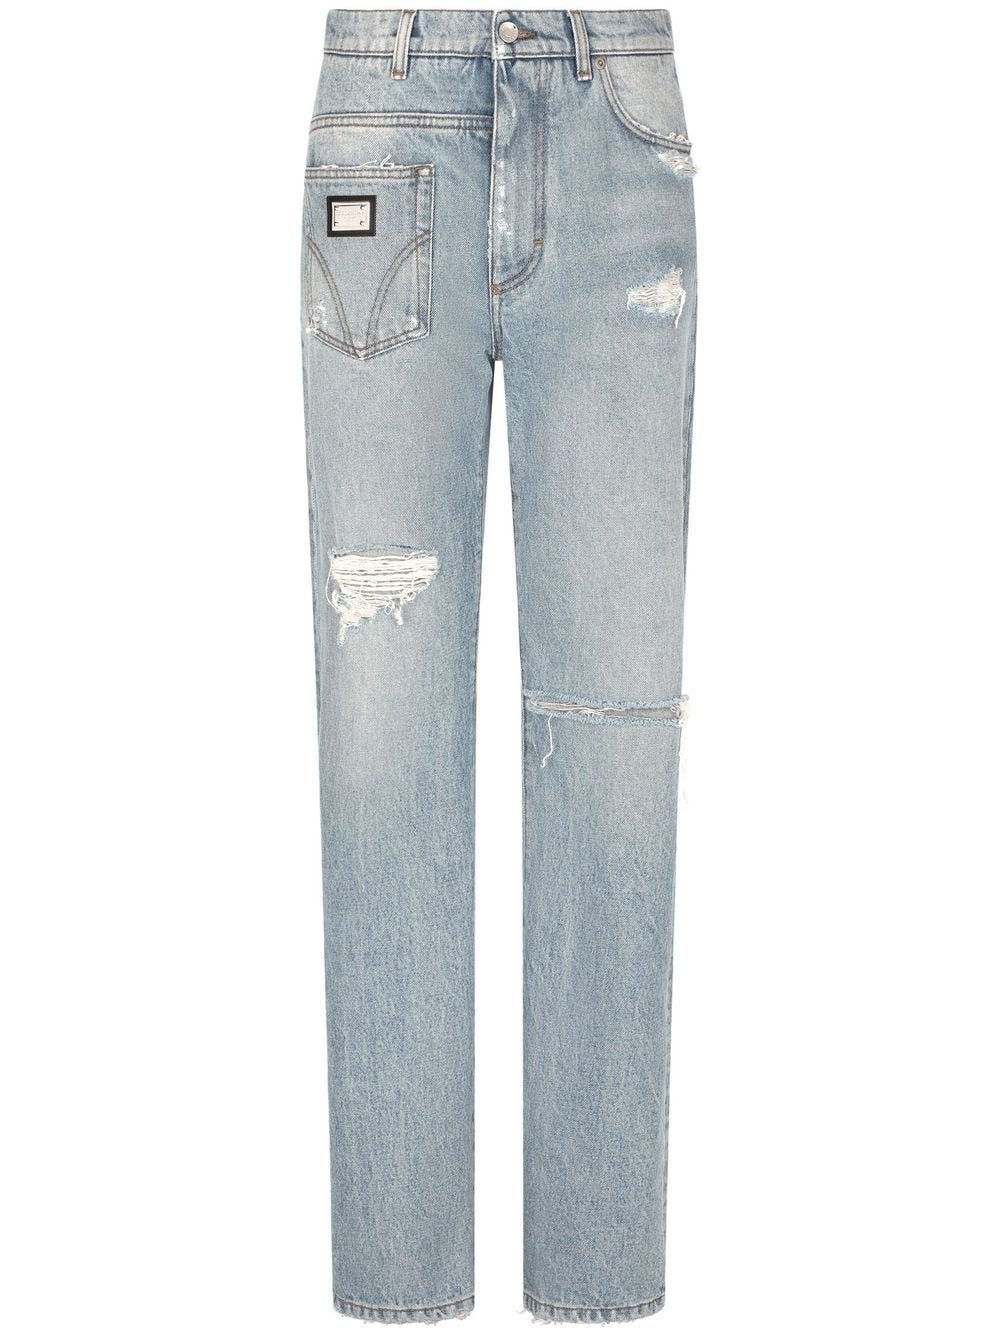 DOLCE & GABBANA STRAIGHT JEANS WITH A WORN EFFECT